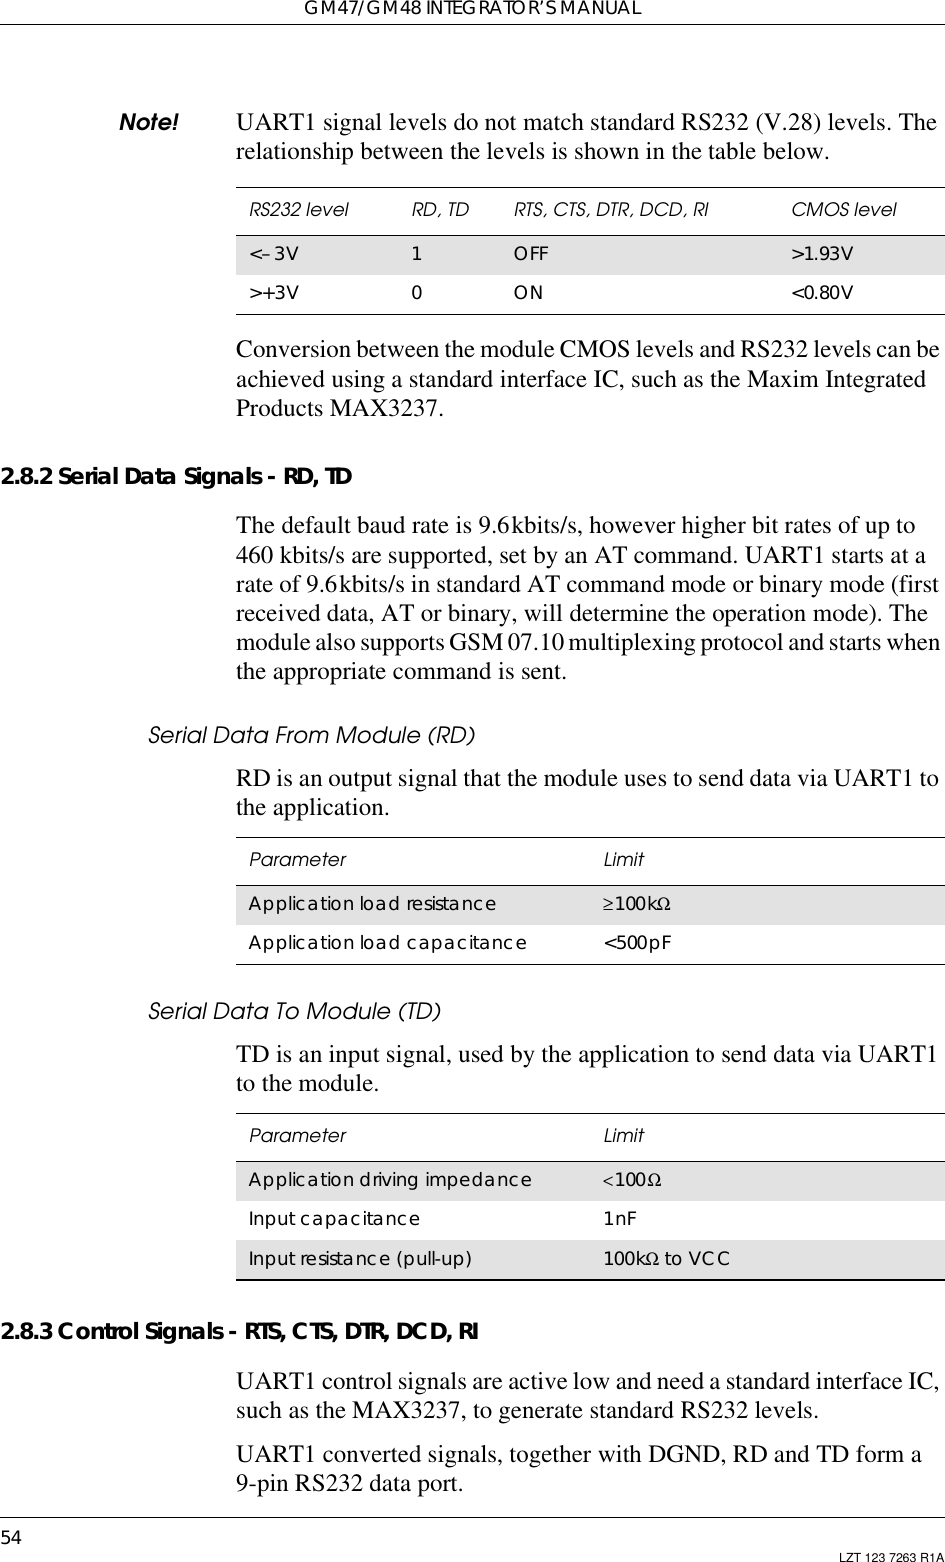 GM47/GM48 INTEGRATOR’S MANUAL54 LZT 123 7263 R1ANote! UART1 signal levels do not match standard RS232 (V.28) levels. Therelationship between the levels is shown in the table below.Conversion between the module CMOS levels and RS232 levels can beachieved using a standard interface IC, such as the Maxim IntegratedProducts MAX3237.2.8.2 Serial Data Signals - RD, TDThe default baud rate is 9.6kbits/s, however higher bit rates of up to460 kbits/s are supported, set by an AT command. UART1 starts at arate of 9.6kbits/s in standard AT command mode or binary mode (firstreceived data, AT or binary, will determine the operation mode). Themodule also supports GSM 07.10 multiplexing protocol and starts whenthe appropriate command is sent.Serial Data From Module (RD)RD is an output signal that the module uses to send data via UART1 tothe application.Serial Data To Module (TD)TD is an input signal, used by the application to send data via UART1to the module.2.8.3 Control Signals - RTS, CTS, DTR, DCD, RIUART1 control signals are active low and need a standard interface IC,such as the MAX3237, to generate standard RS232 levels.UART1 converted signals, together with DGND, RD and TD form a9-pin RS232 data port.RS232 level RD, TD RTS, CTS, DTR, DCD, RI CMOS level&lt;–3V 1OFF &gt;1.93V&gt;+3V 0ON &lt;0.80VParameter LimitApplication load resistance ≥100kΩApplication load capacitance &lt;500pFParameter LimitApplication driving impedance &lt;100ΩInput capacitance 1nFInput resistance (pull-up) 100kΩto VCC